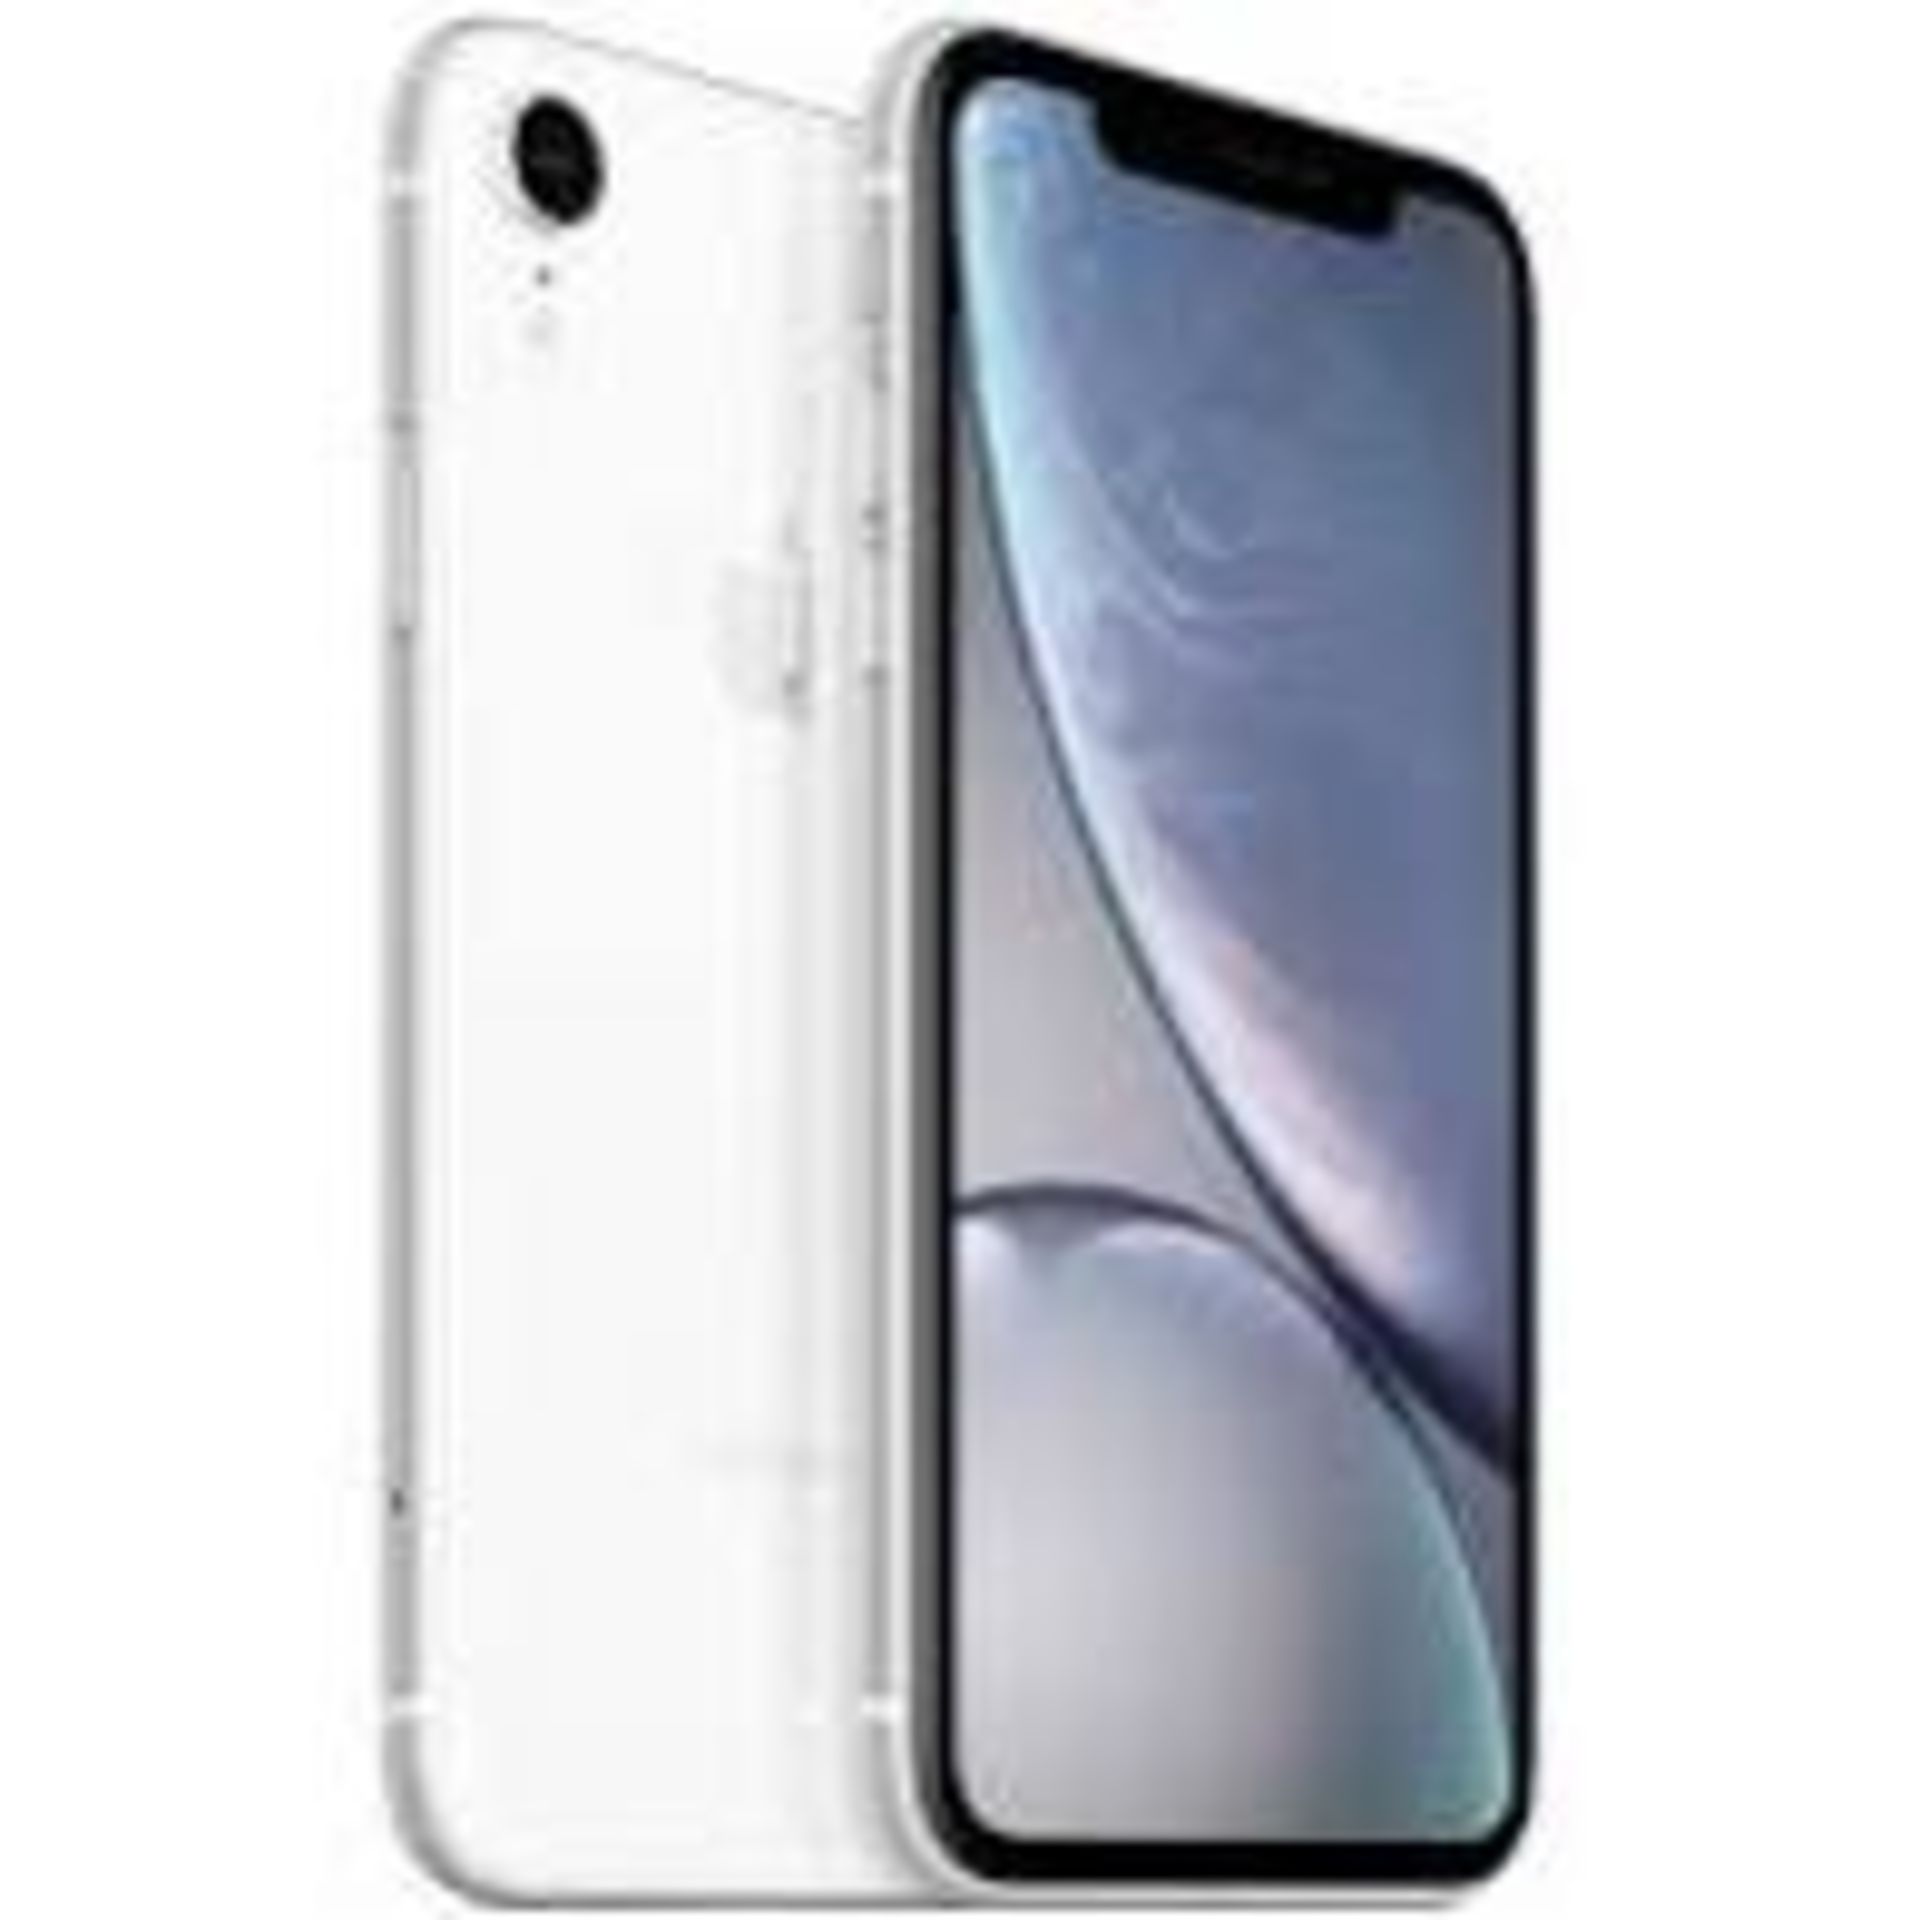 Apple iPhone XR 64GB White. RRP £630 - Grade A - Perfect Working Condition - (Fully refurbished